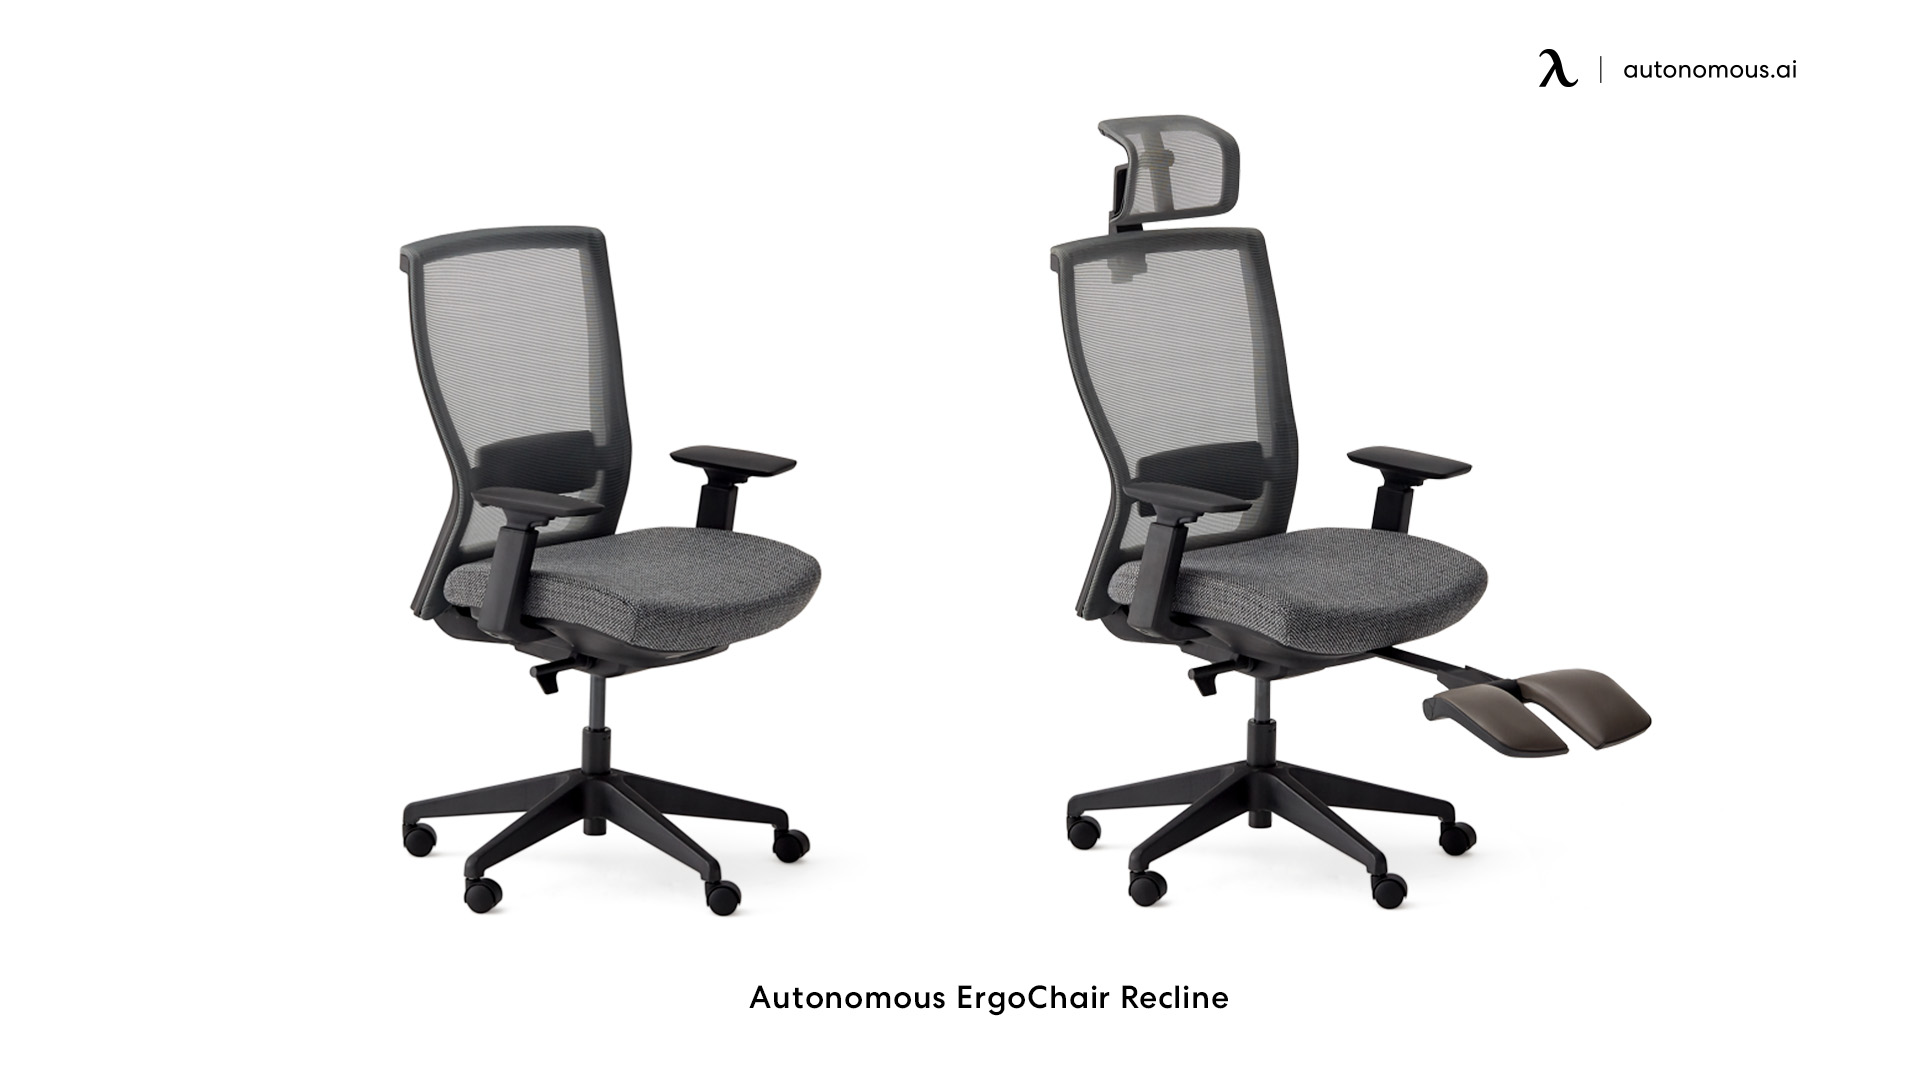 ErgoChair Recline office chair with adjustable arms